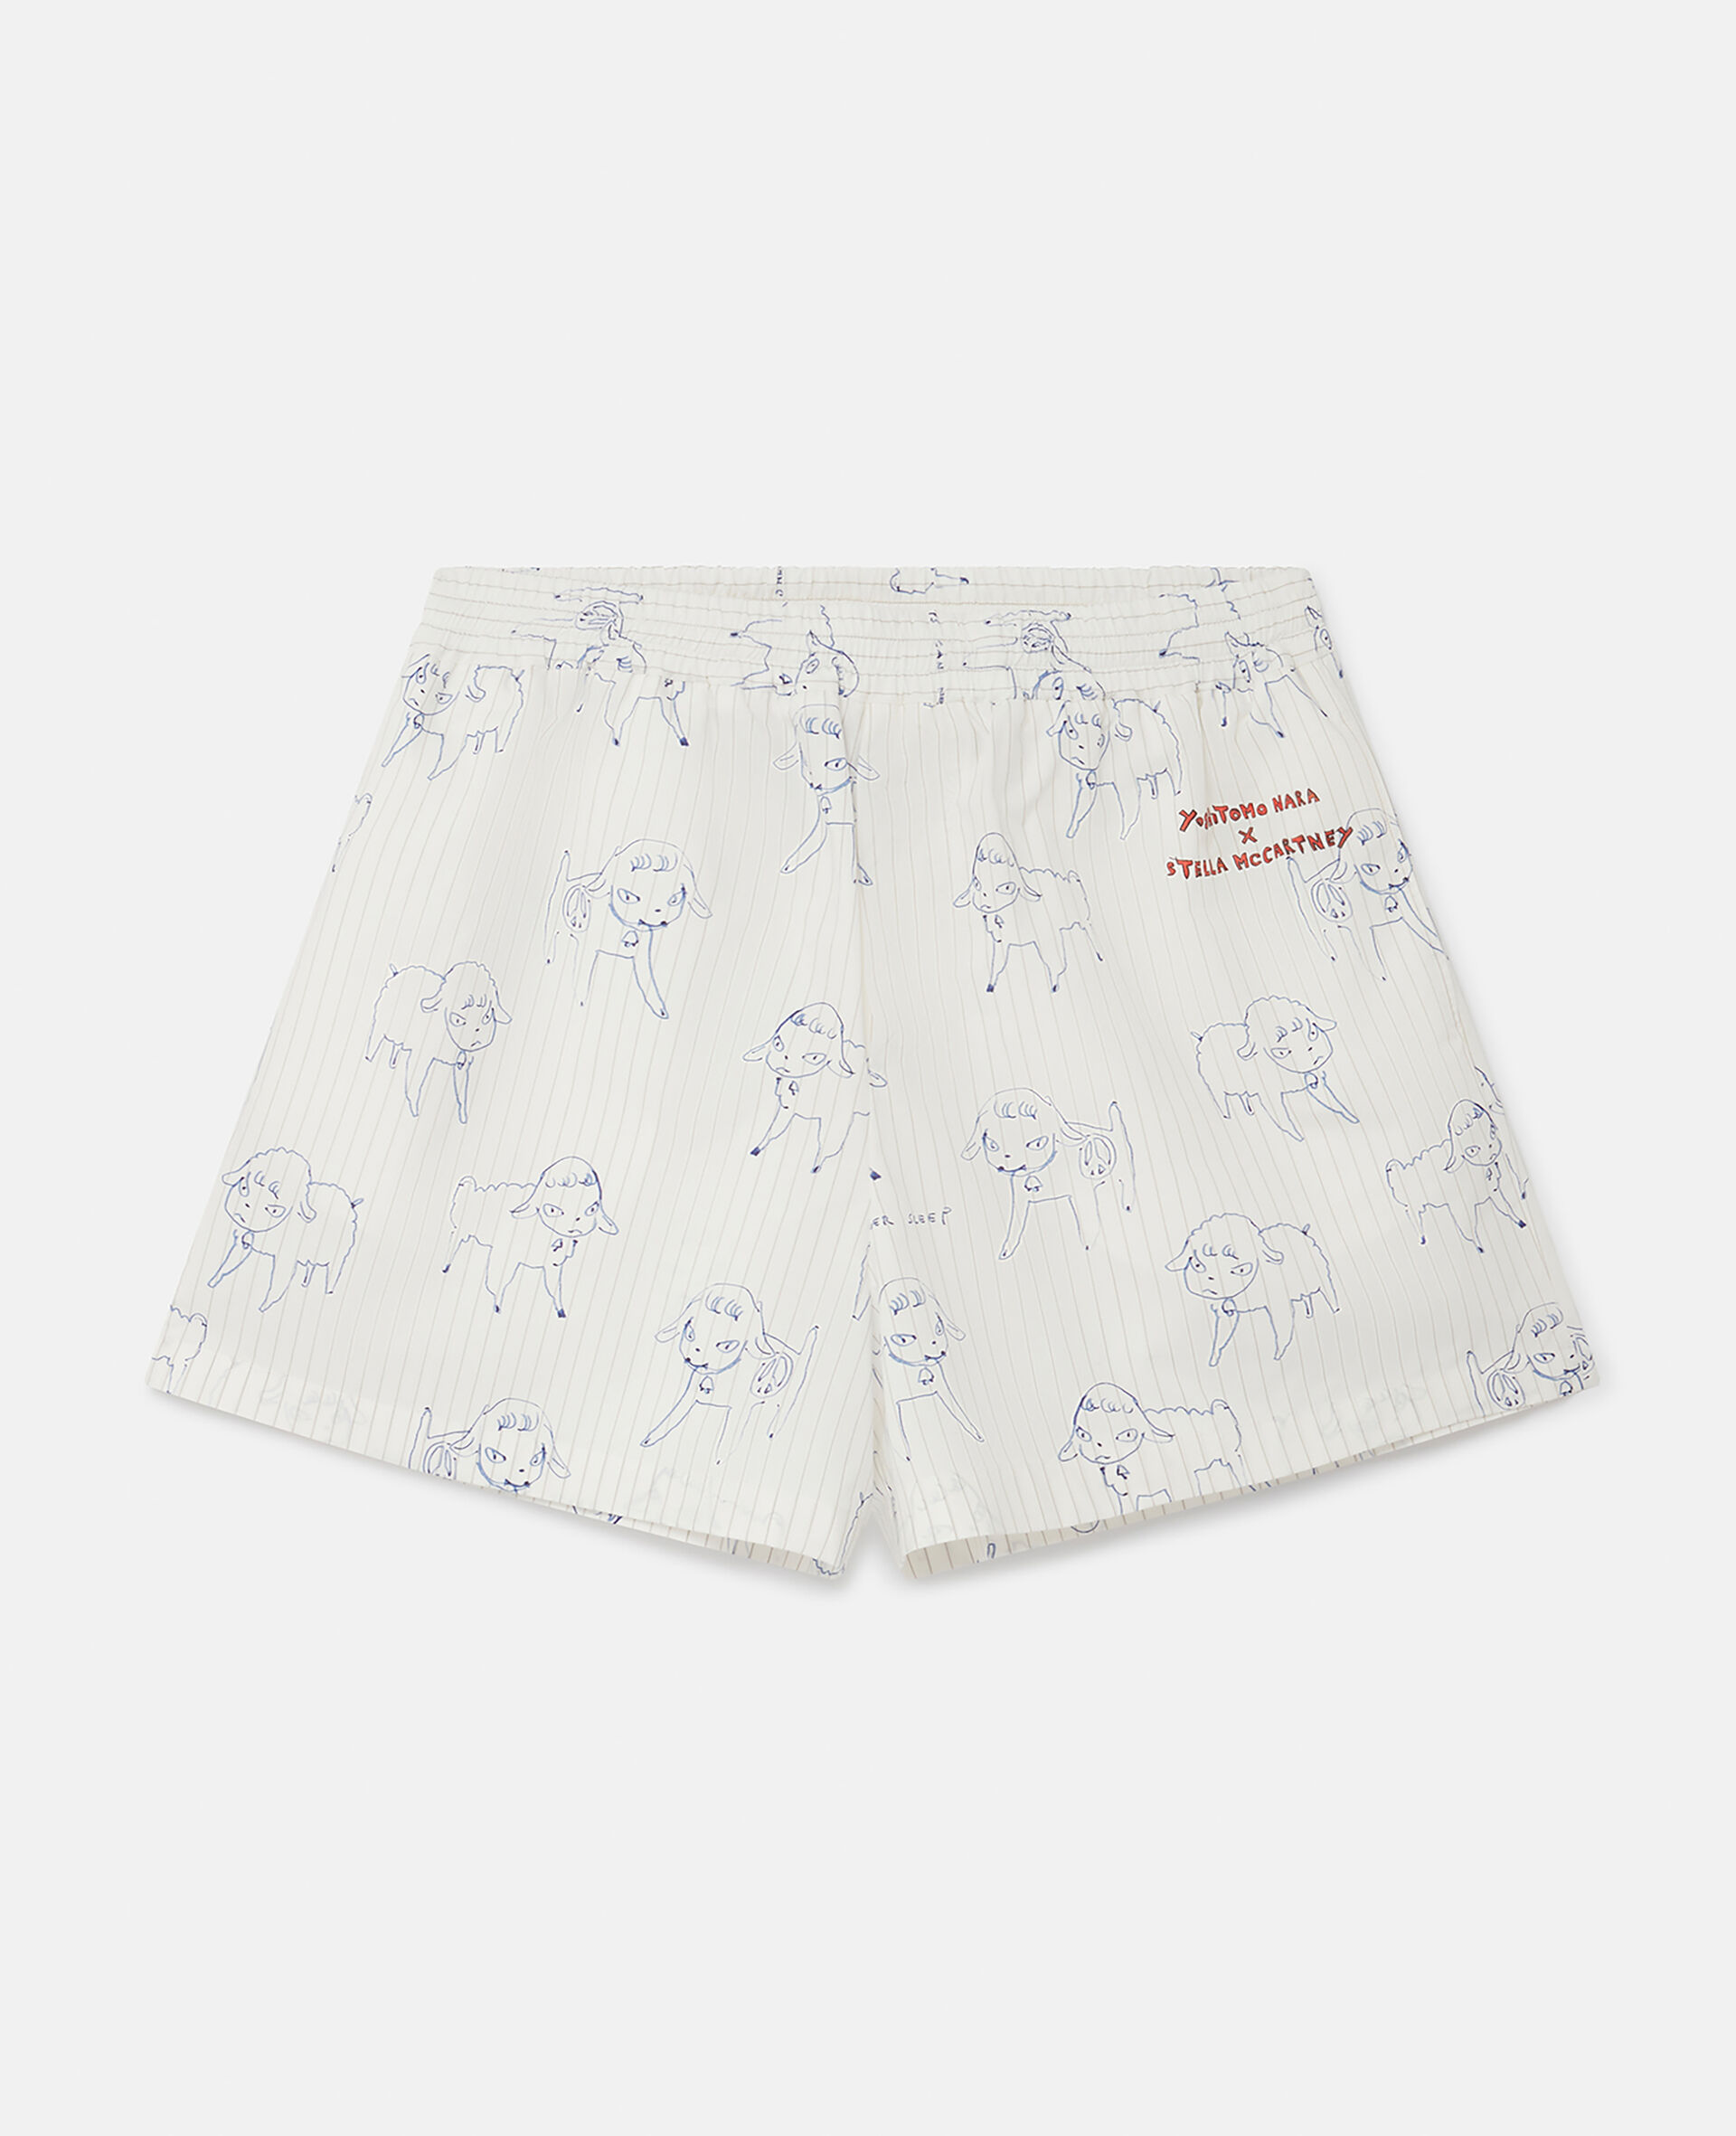 Sheep Can Never Sleep Print Shorts-Multicolour-large image number 0